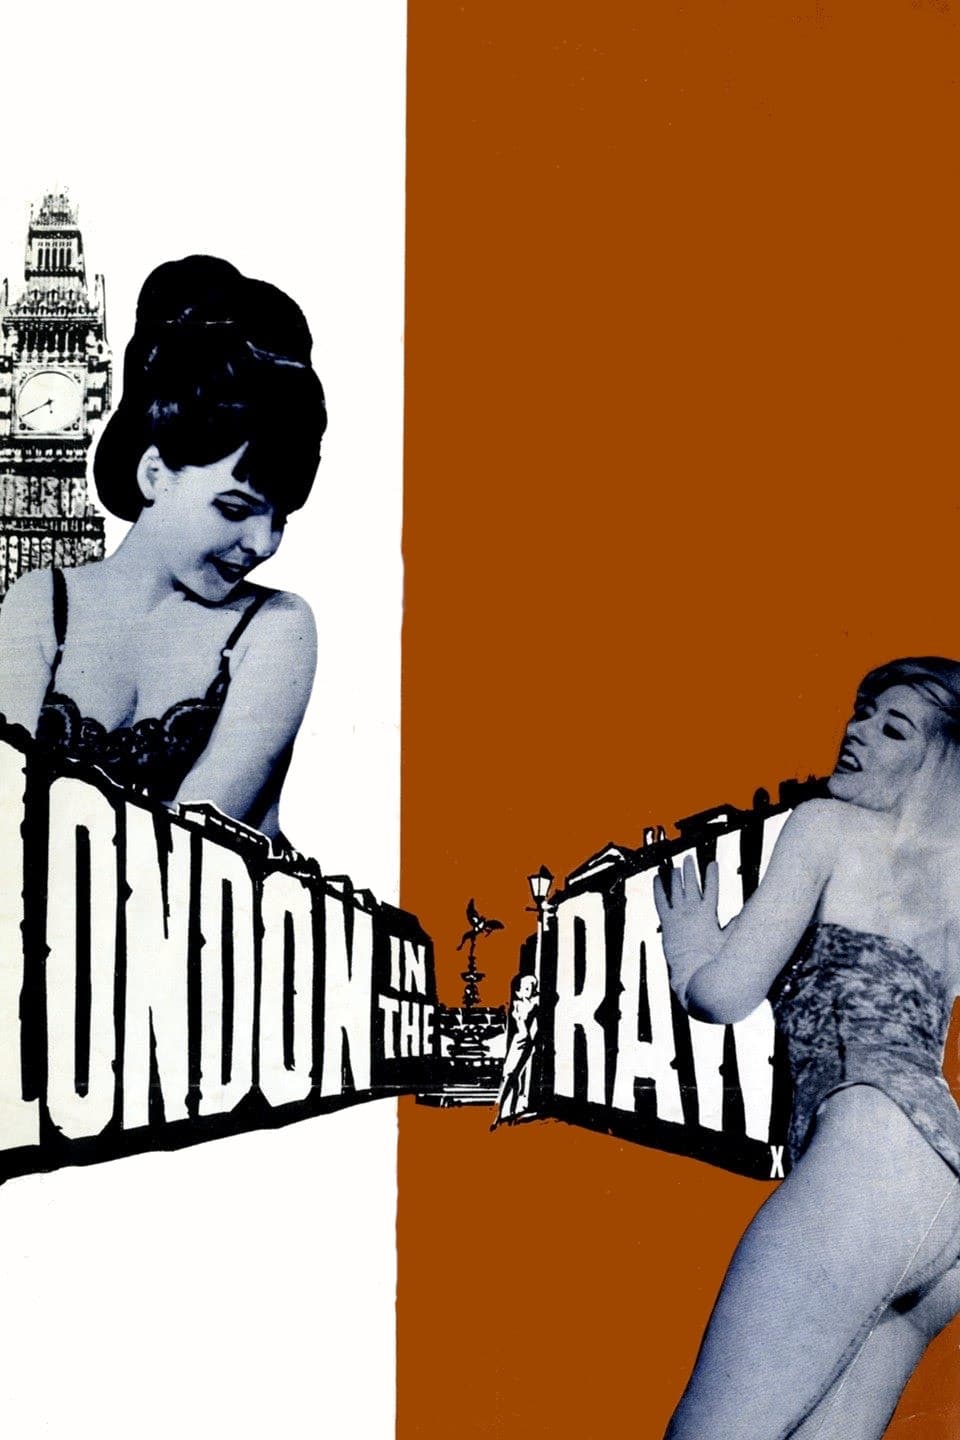 London in the Raw (1964)